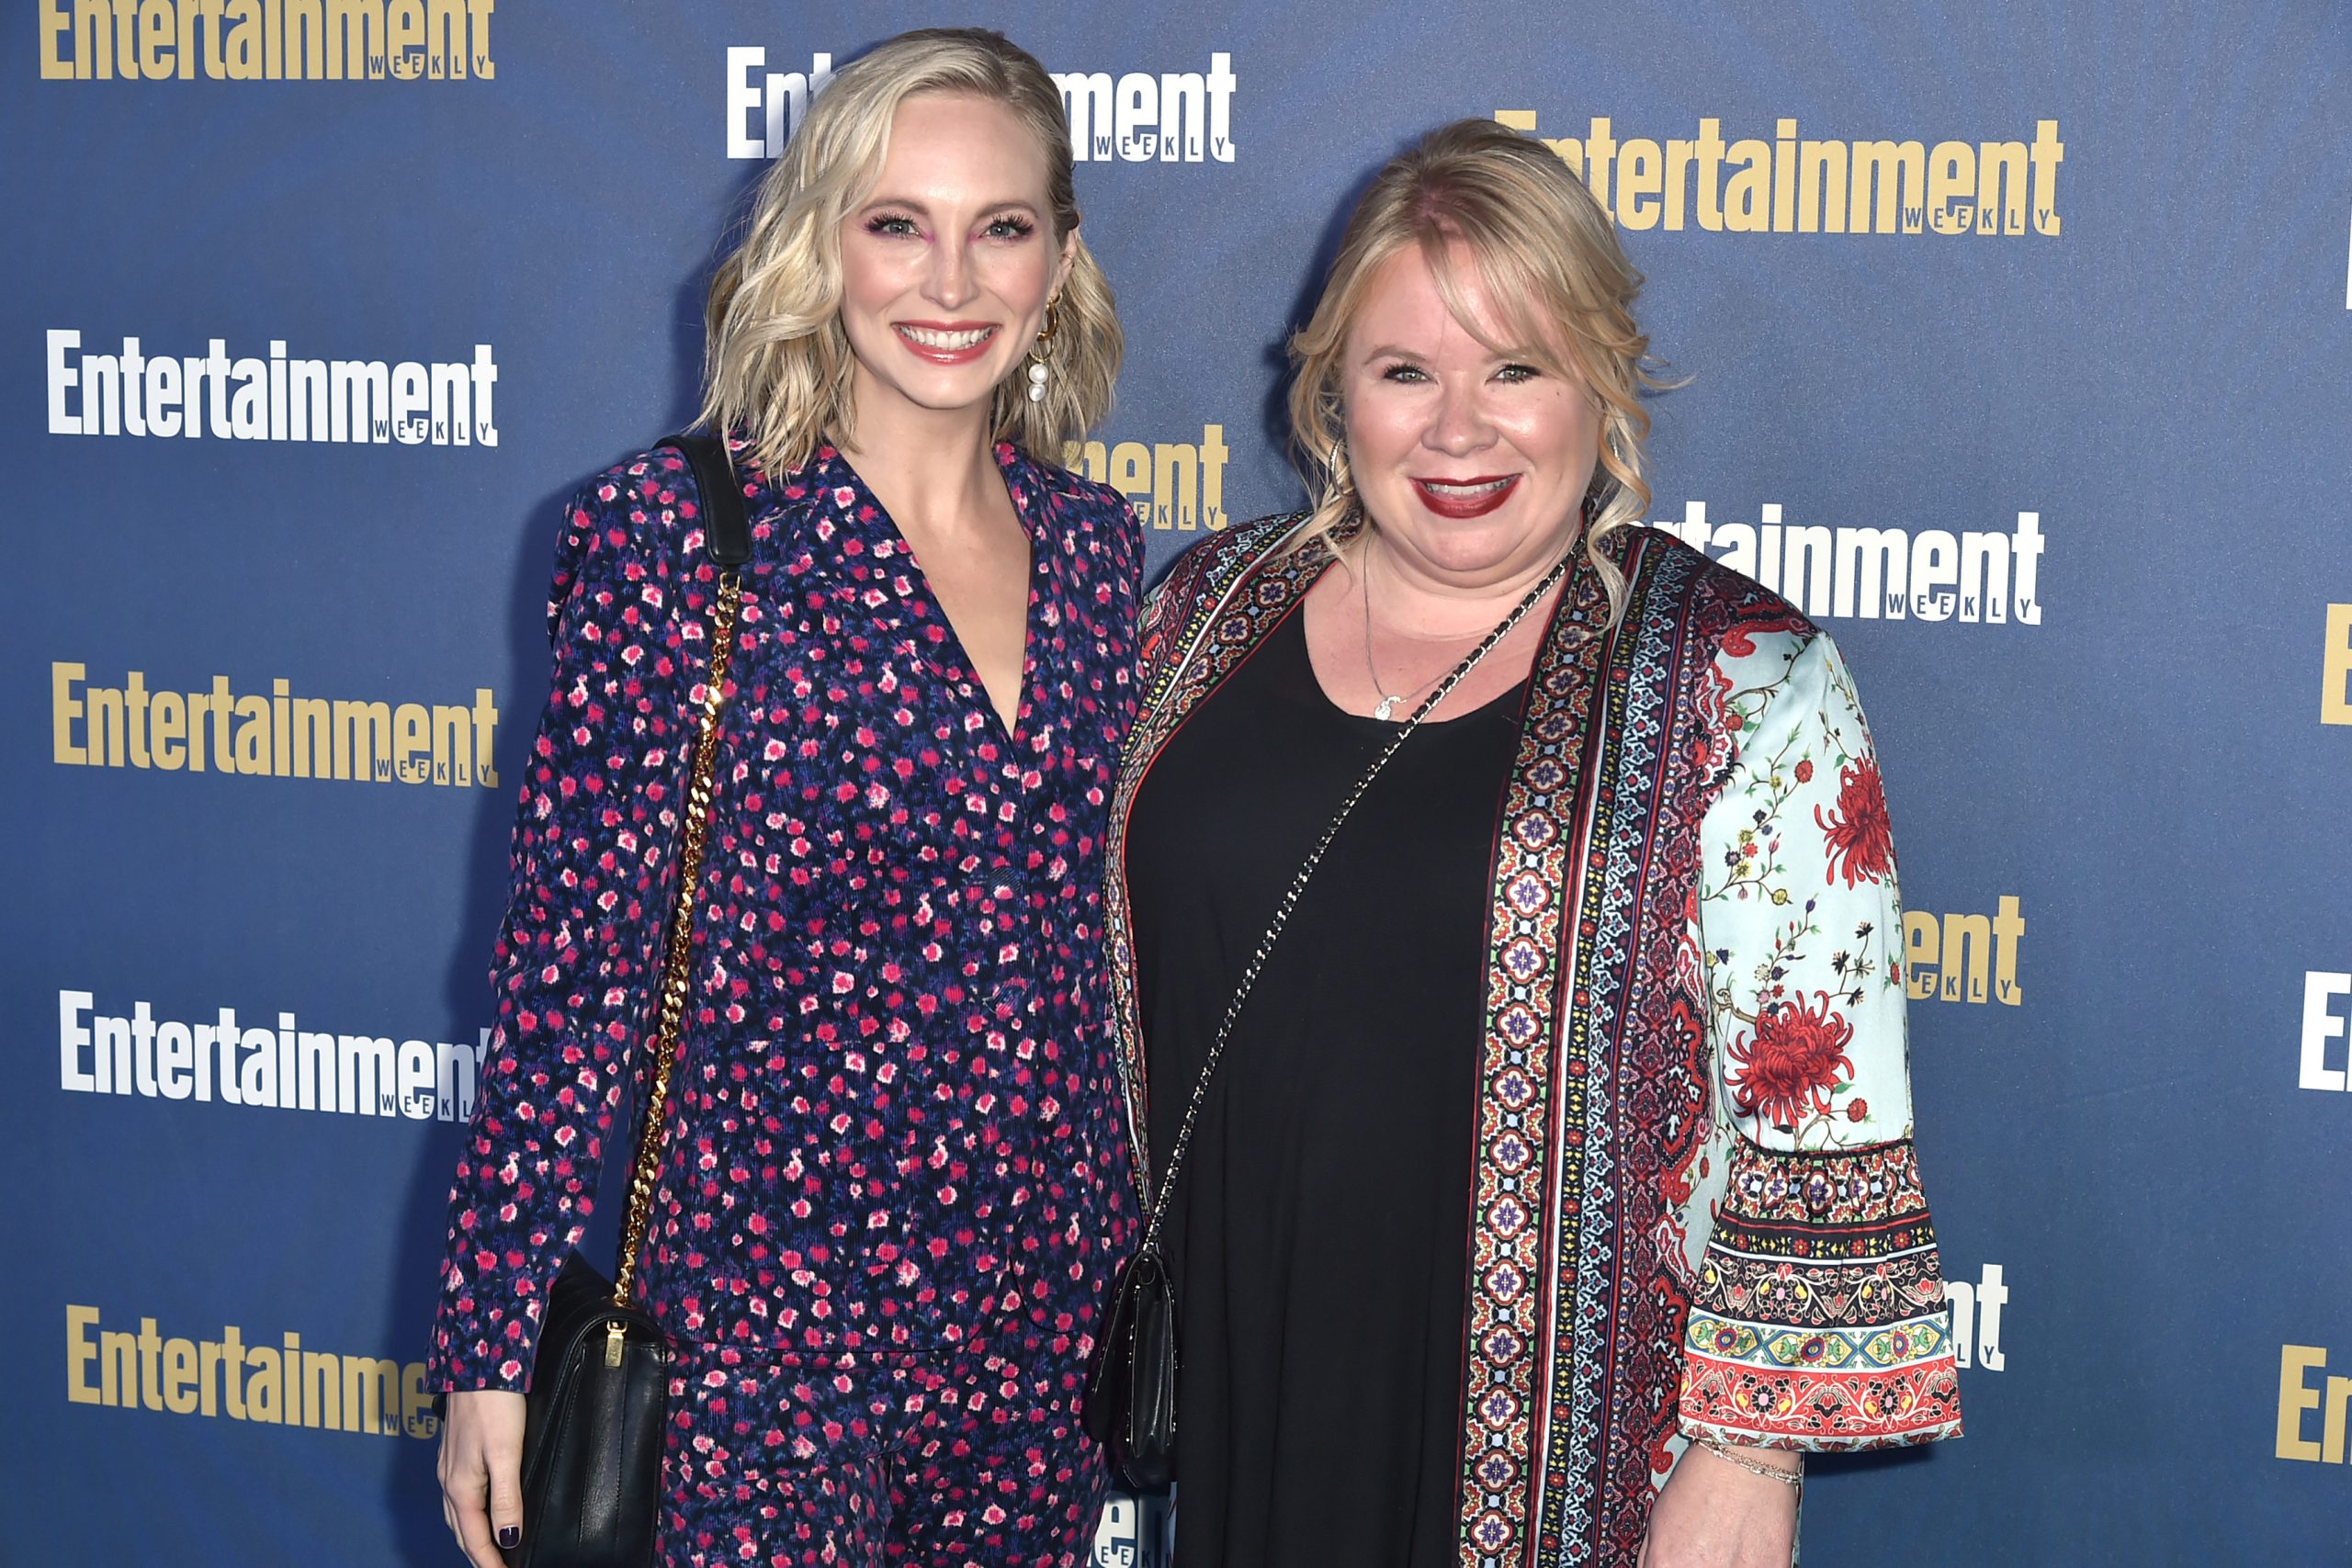 Candice King and Julie Plec, who has a 'The Vampire Diaries' spinoff in the works, pose for pictures on the red carpet.